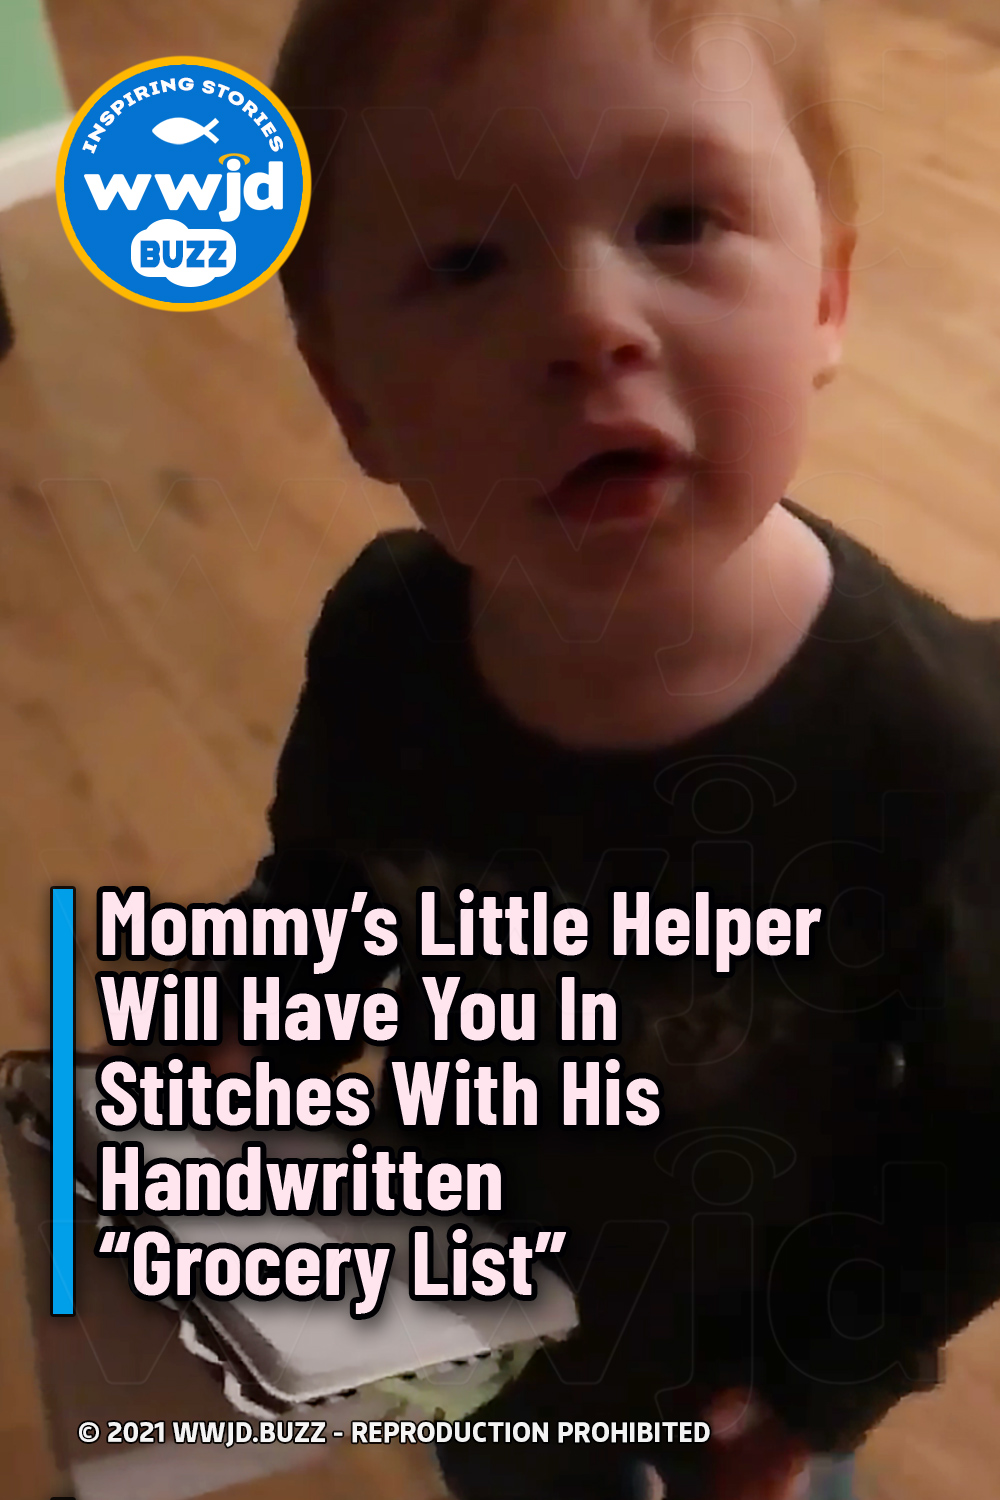 Mommy’s Little Helper Will Have You In Stitches With His Handwritten “Grocery List”